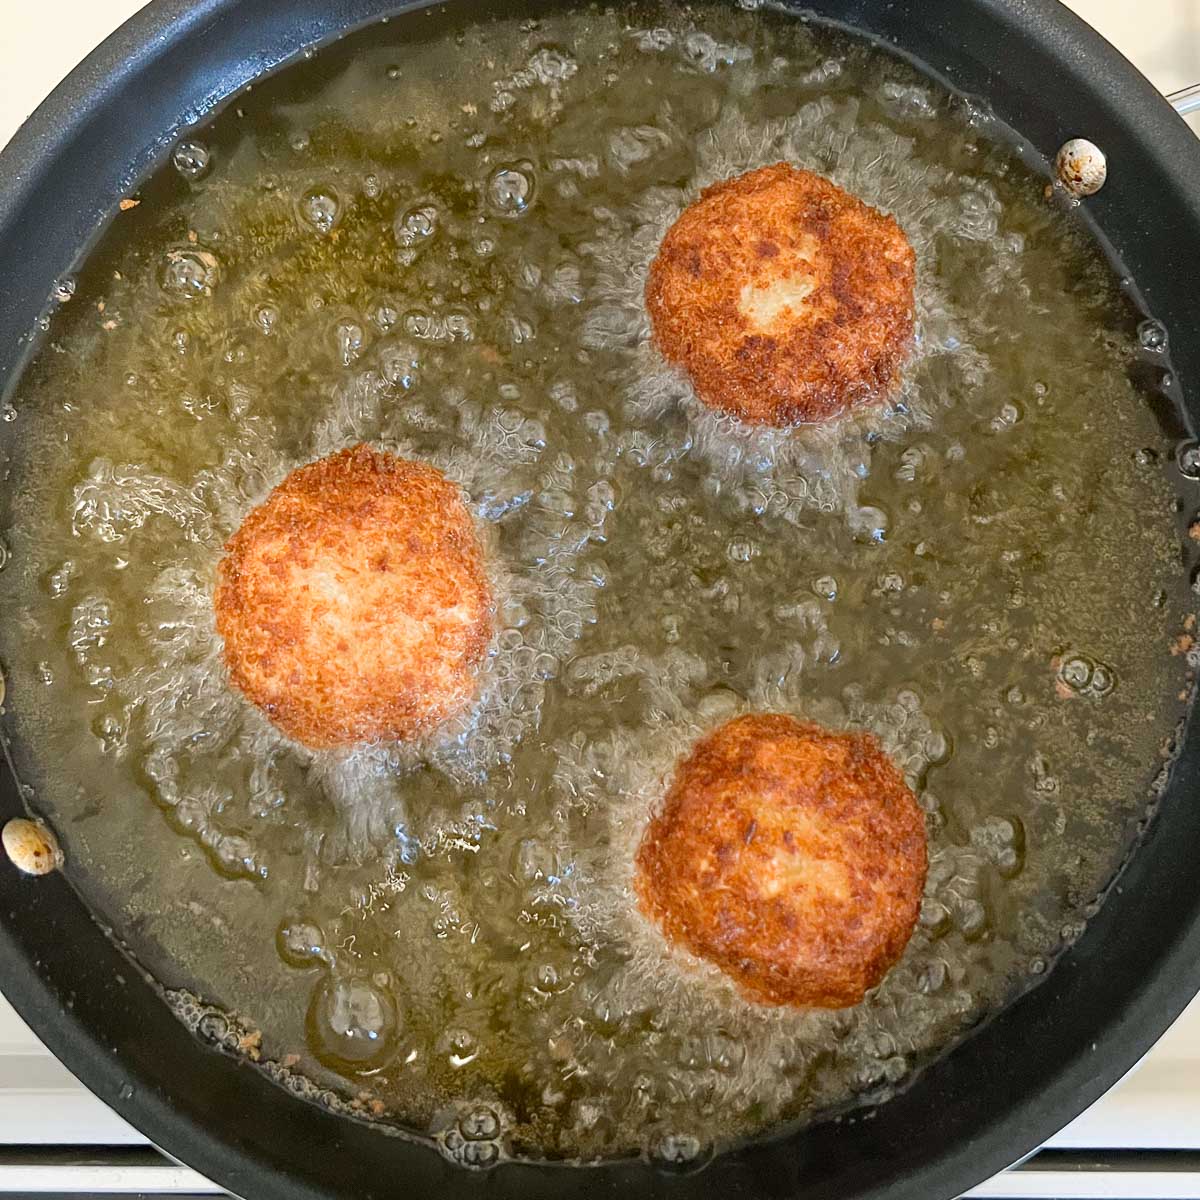 potato balls being deep fried after being rotated